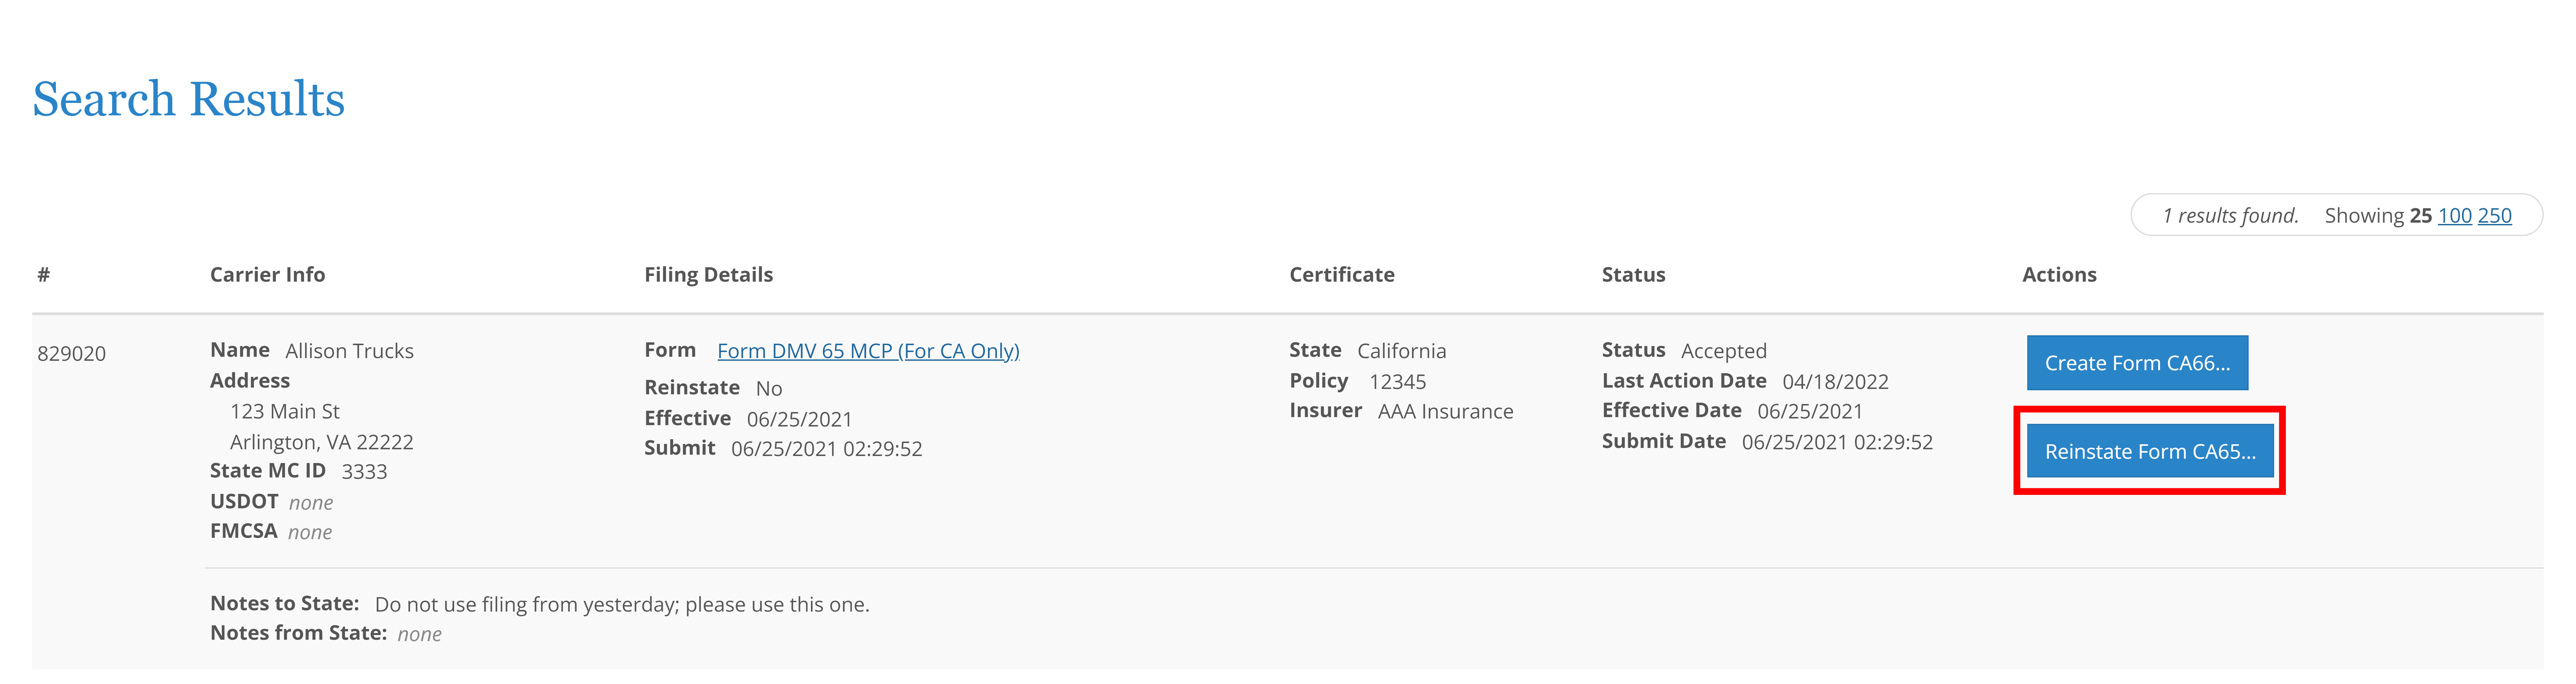 Screen shot showing Reinstate Form CA 65 button for approved MCP 65 filing.